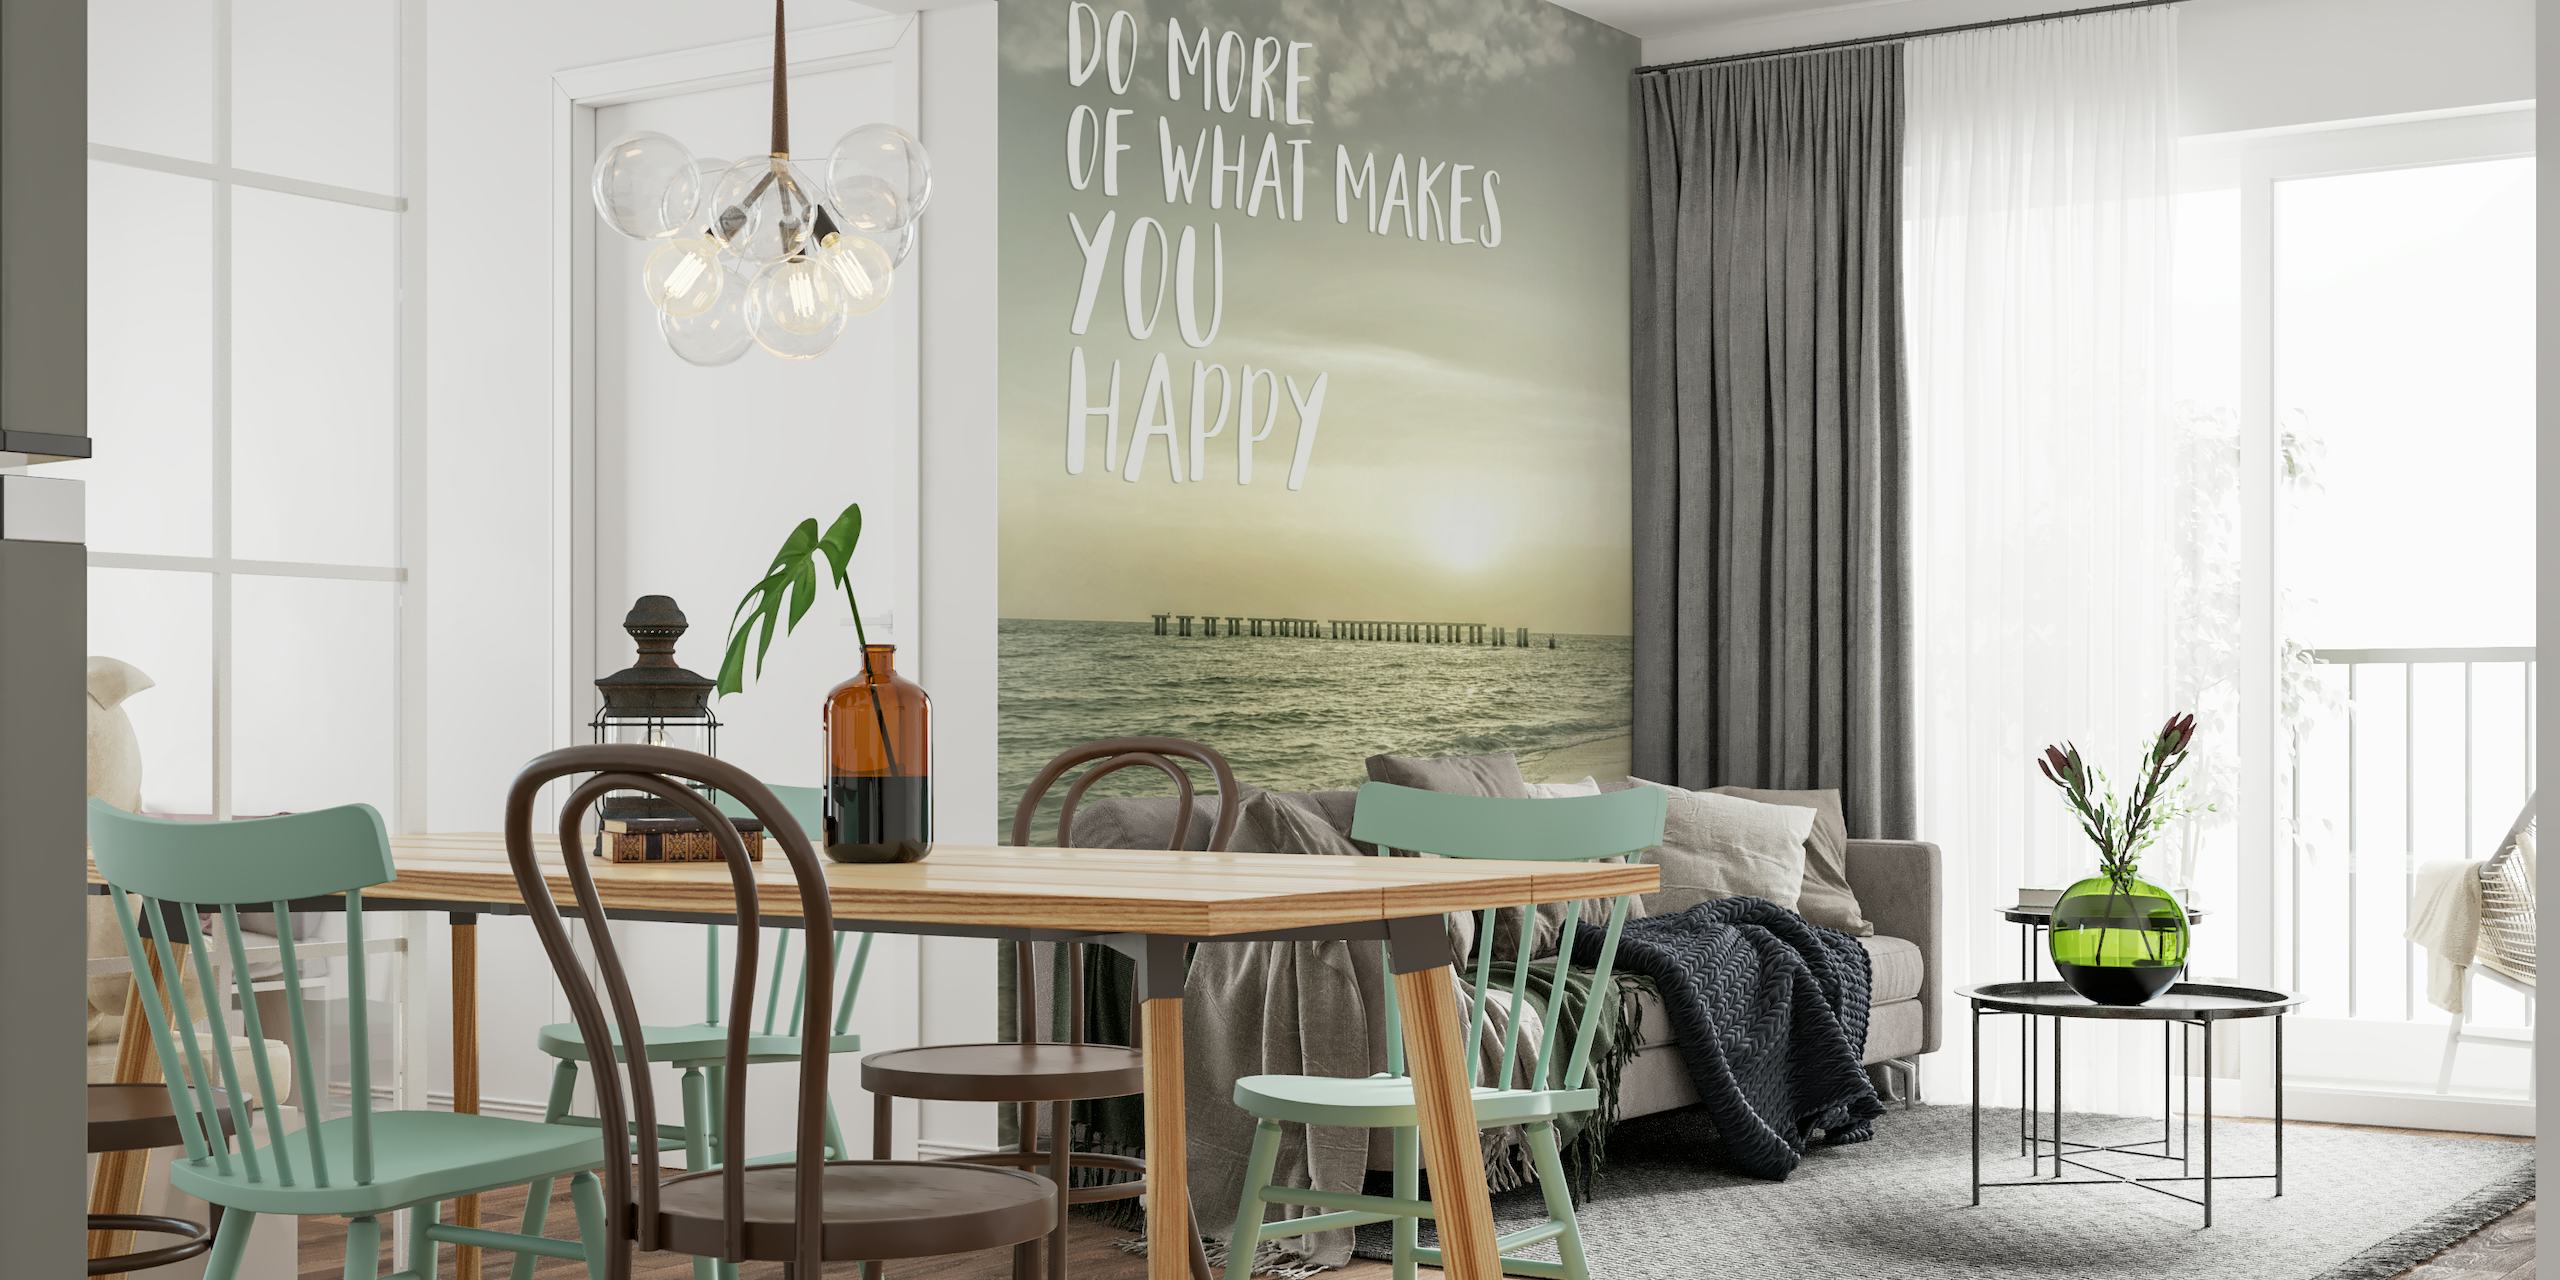 Do more of what makes you happy | Sunset tapety